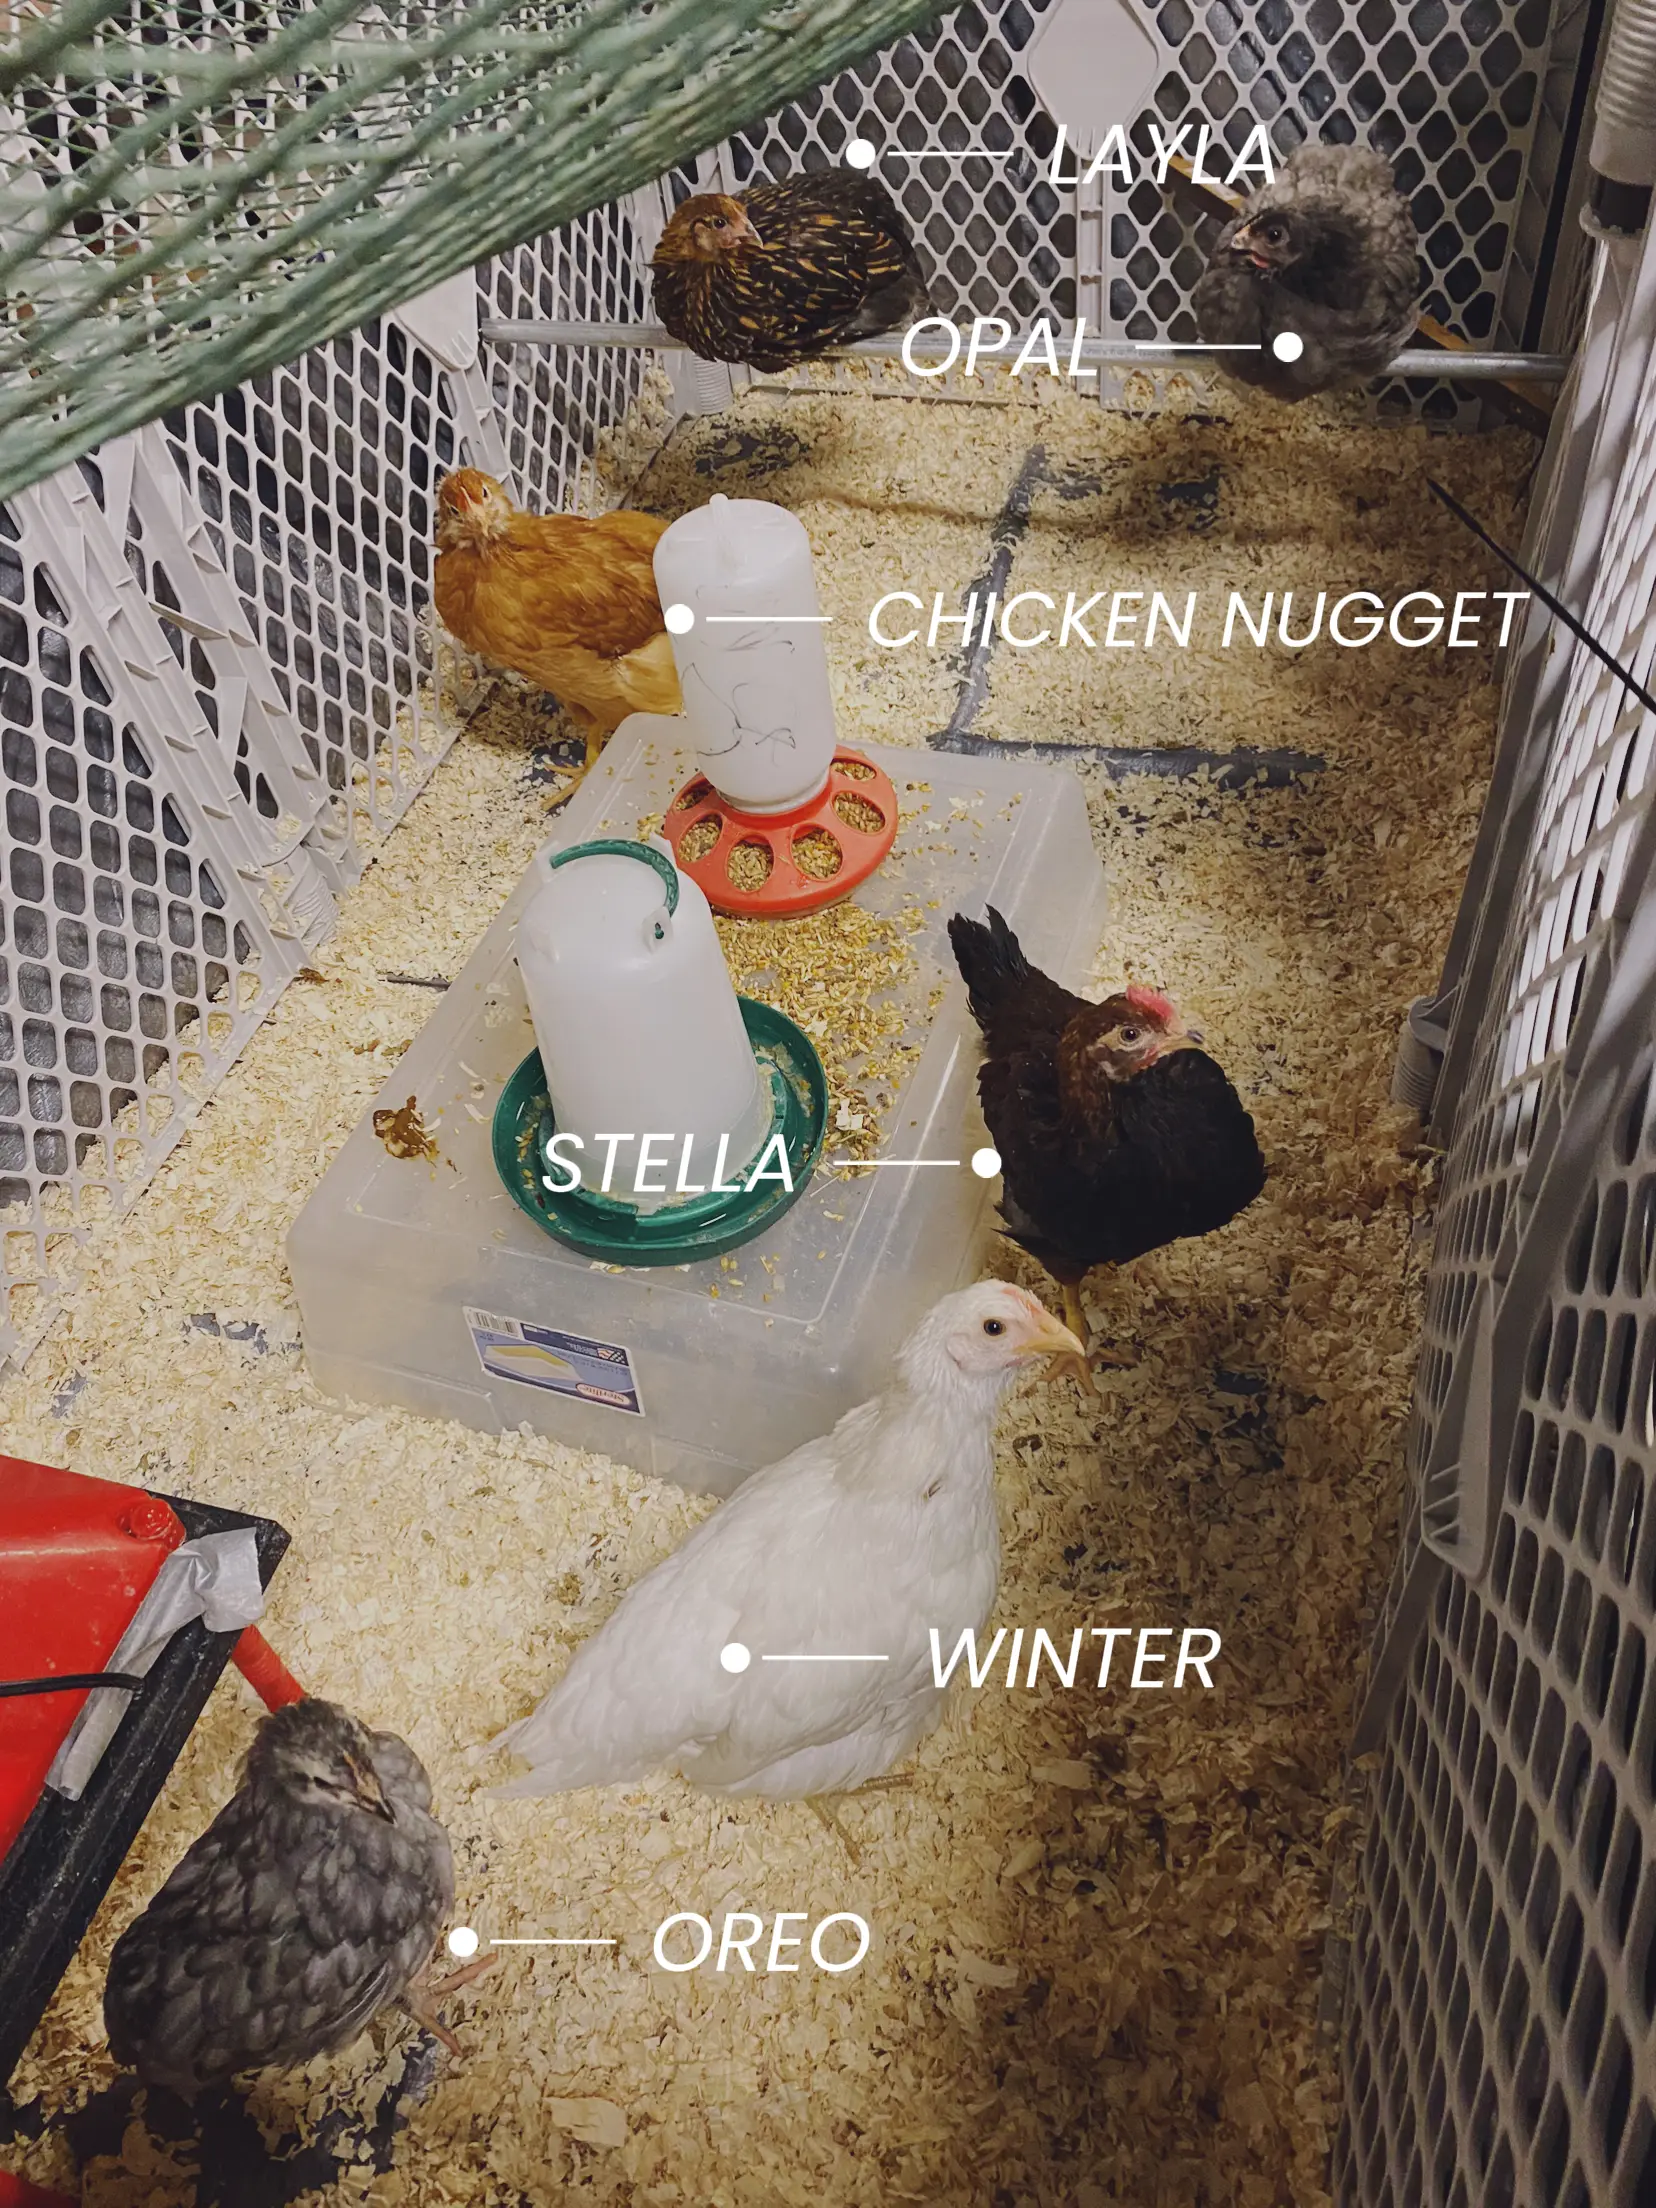 How to Winterize a Chicken Tractor - Mama on the Homestead